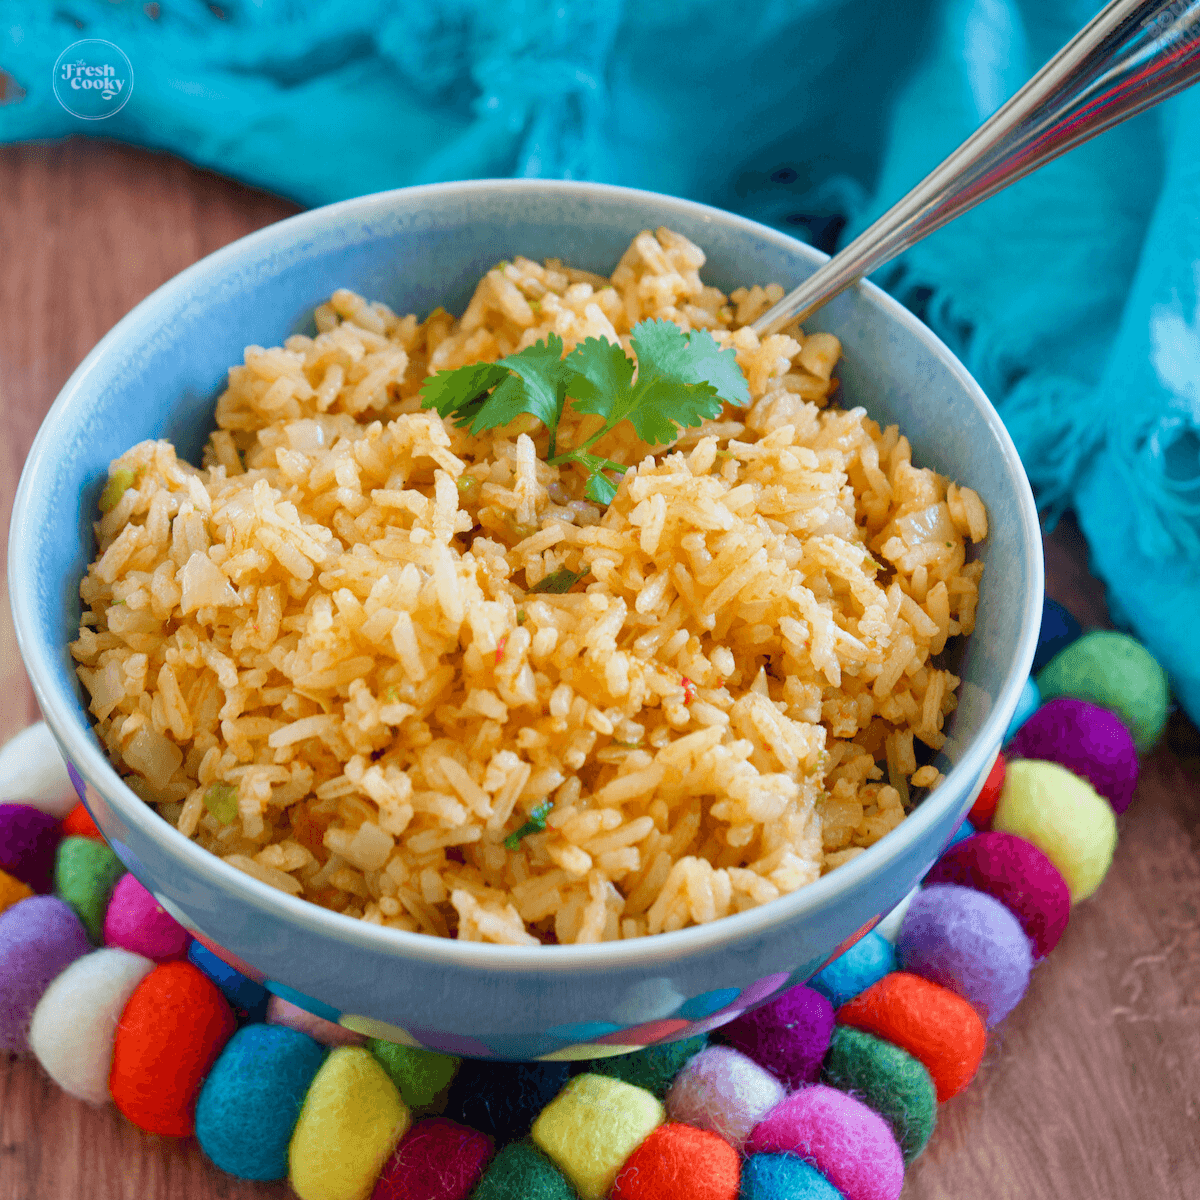 https://www.thefreshcooky.com/wp-content/uploads/2018/05/Vegetarian-Spanish-Rice-Square.png